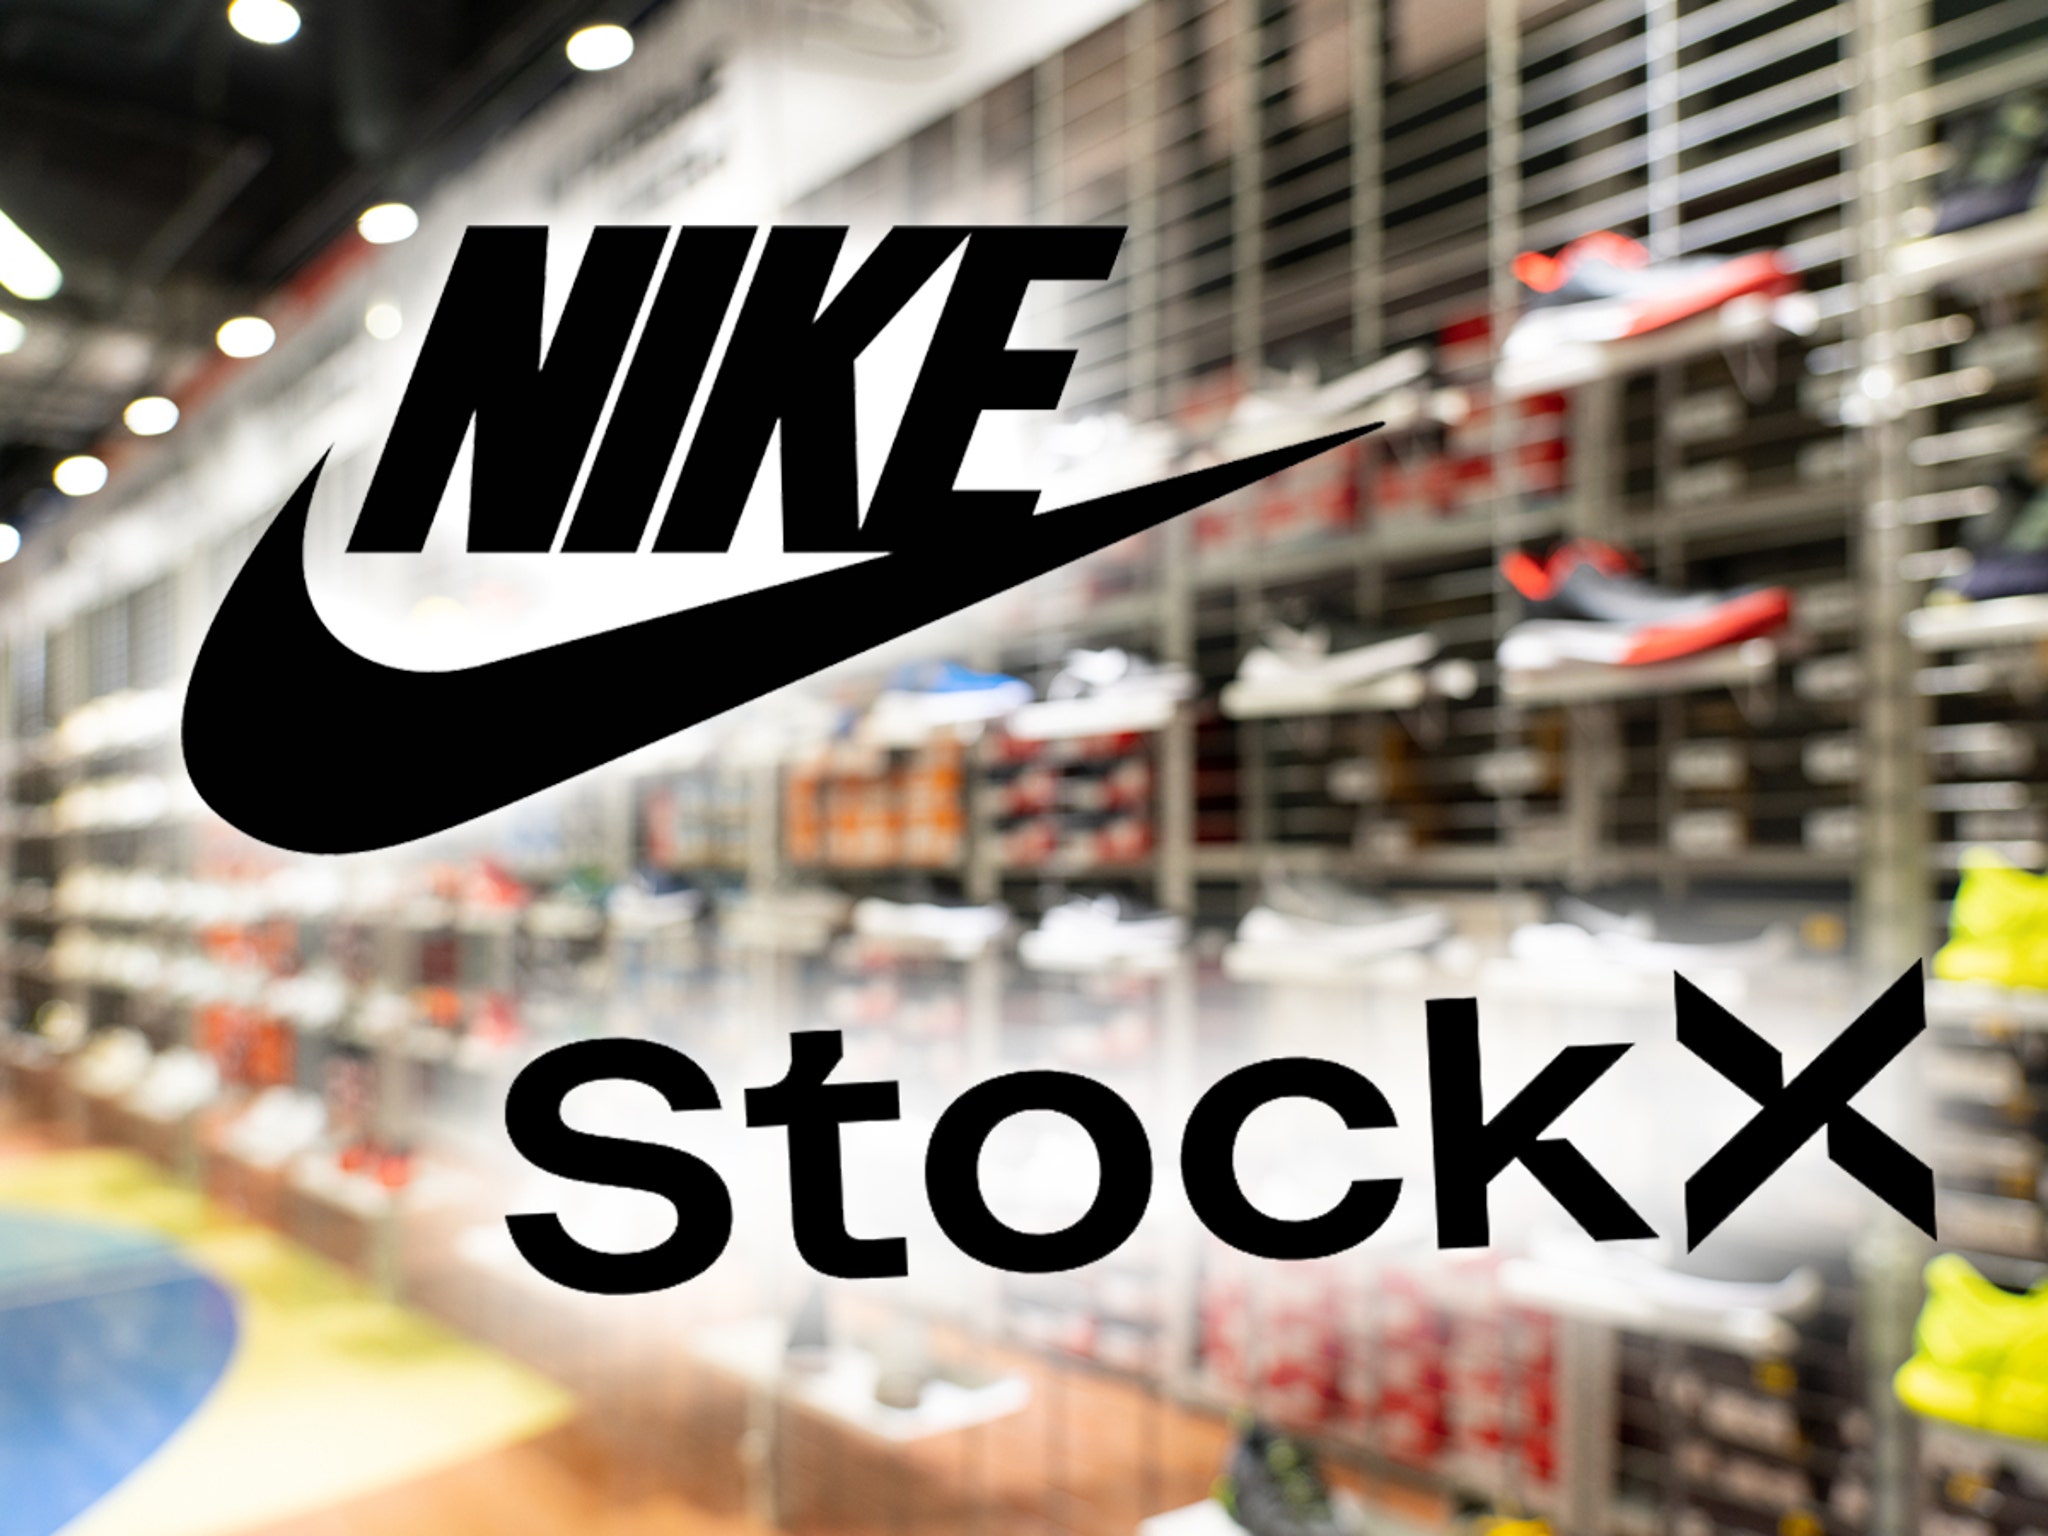 Back To Cool: Knowledge & Power - StockX News